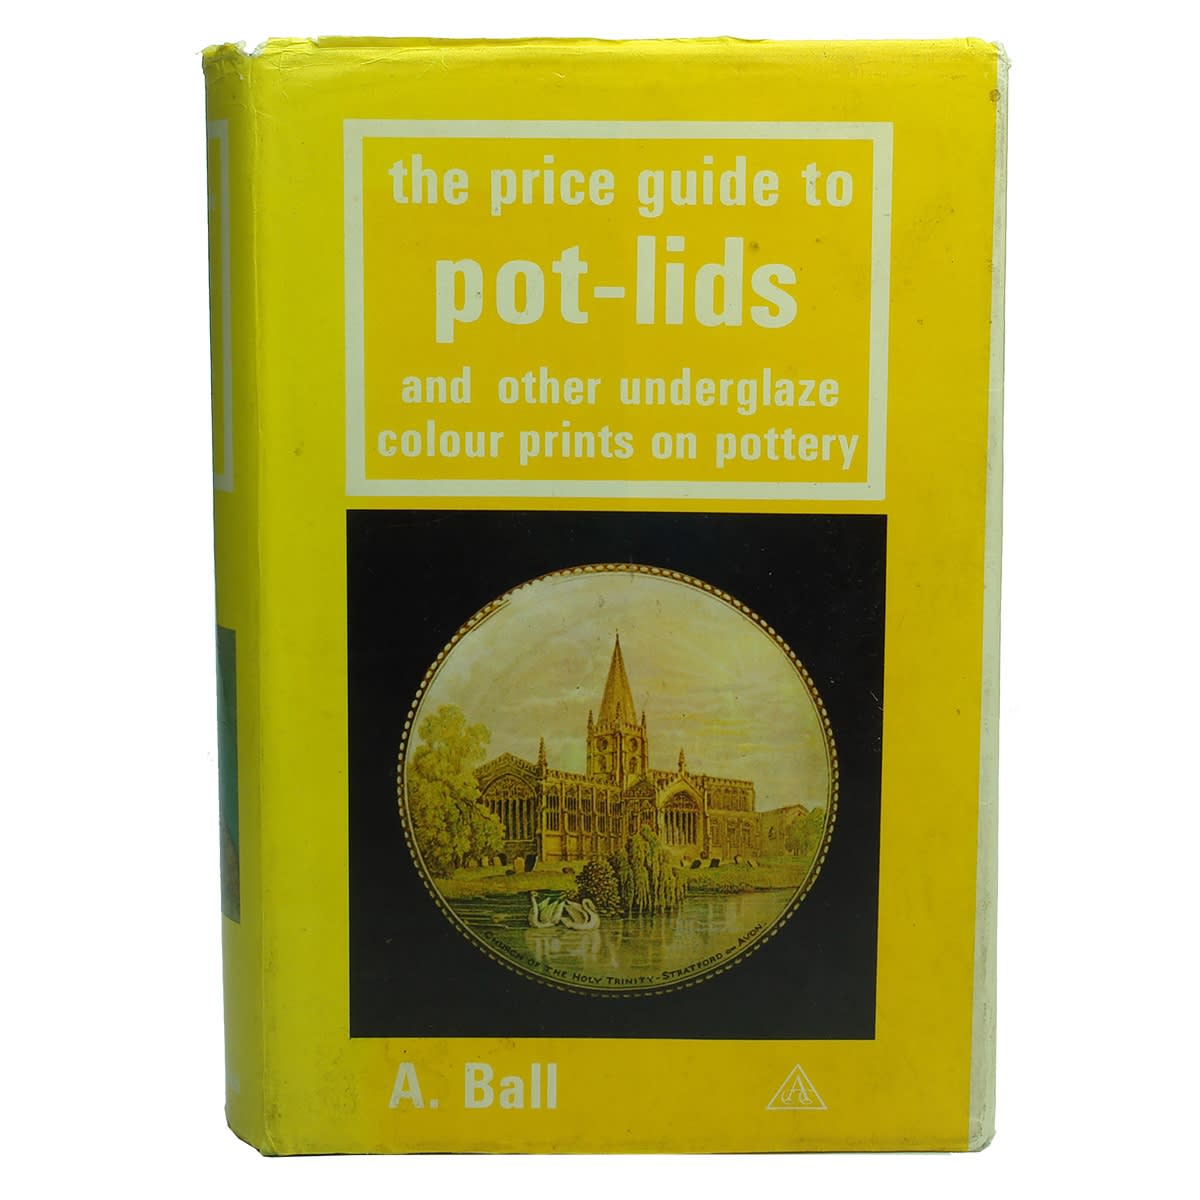 Book. The price guide to pot-lids and other underglaze colour prints on pottery, A. Ball, 1970. (United Kingdom)